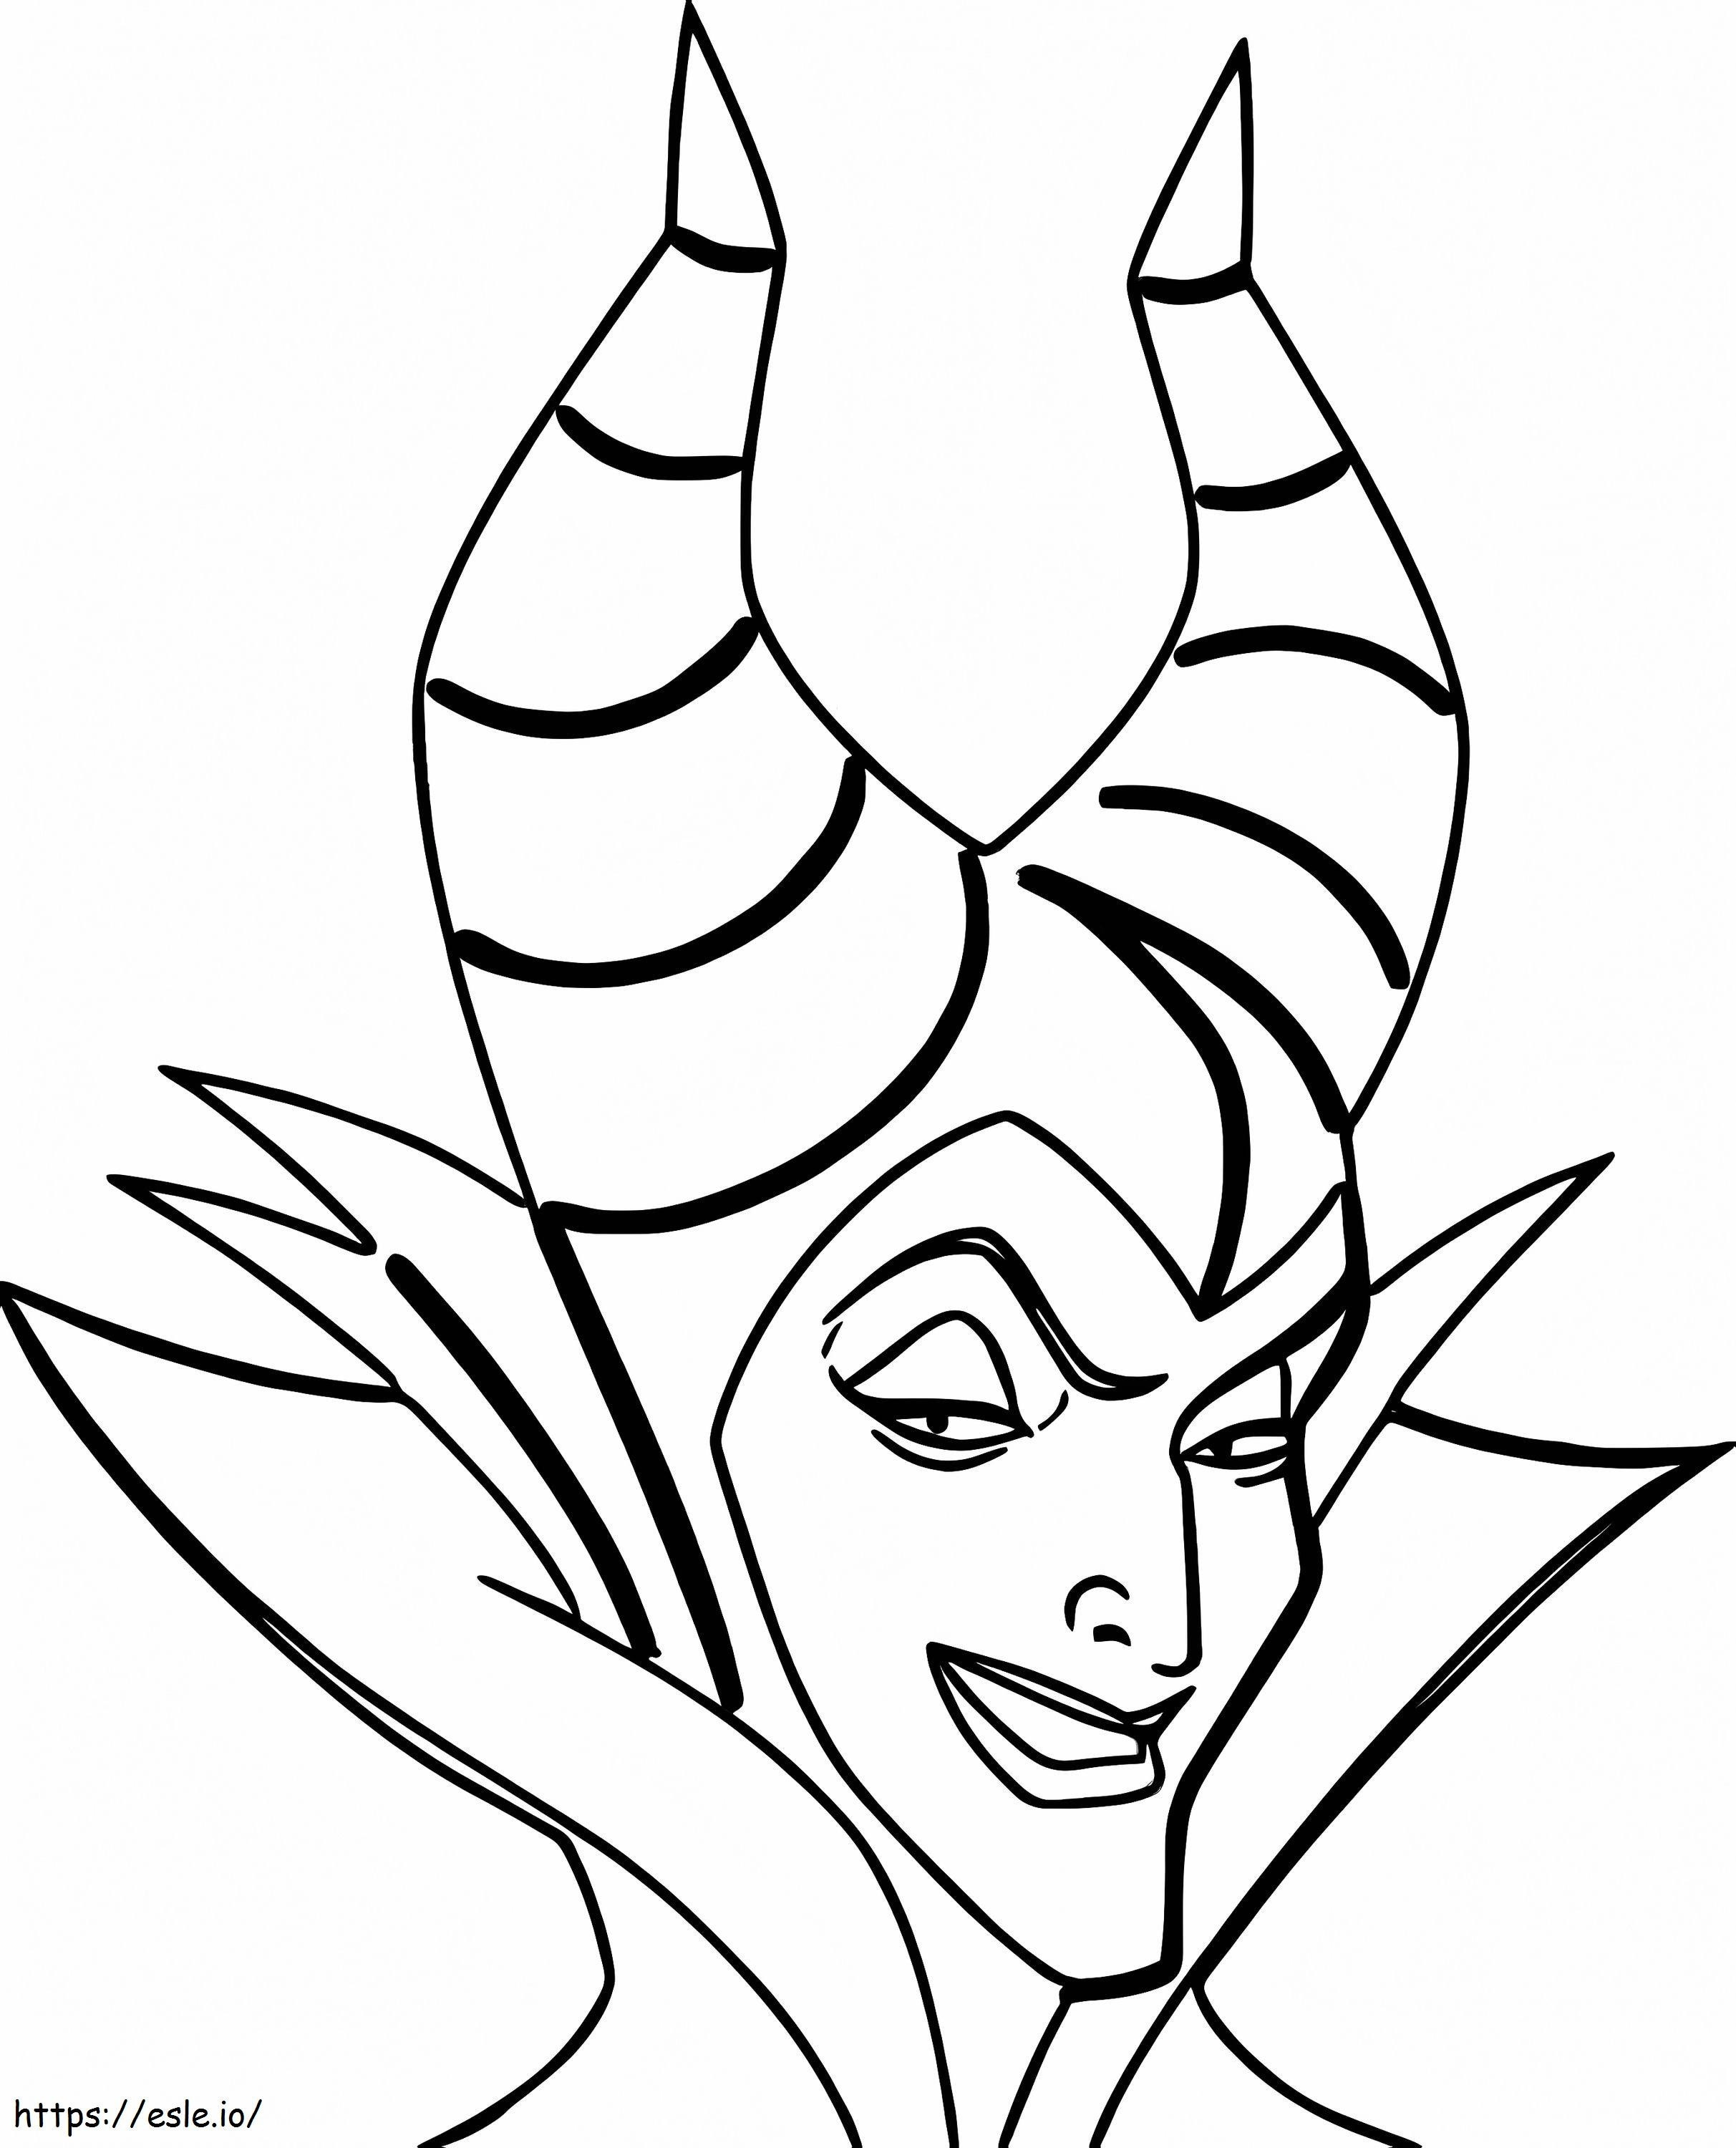 Maleficent Maleficent Smiling coloring page